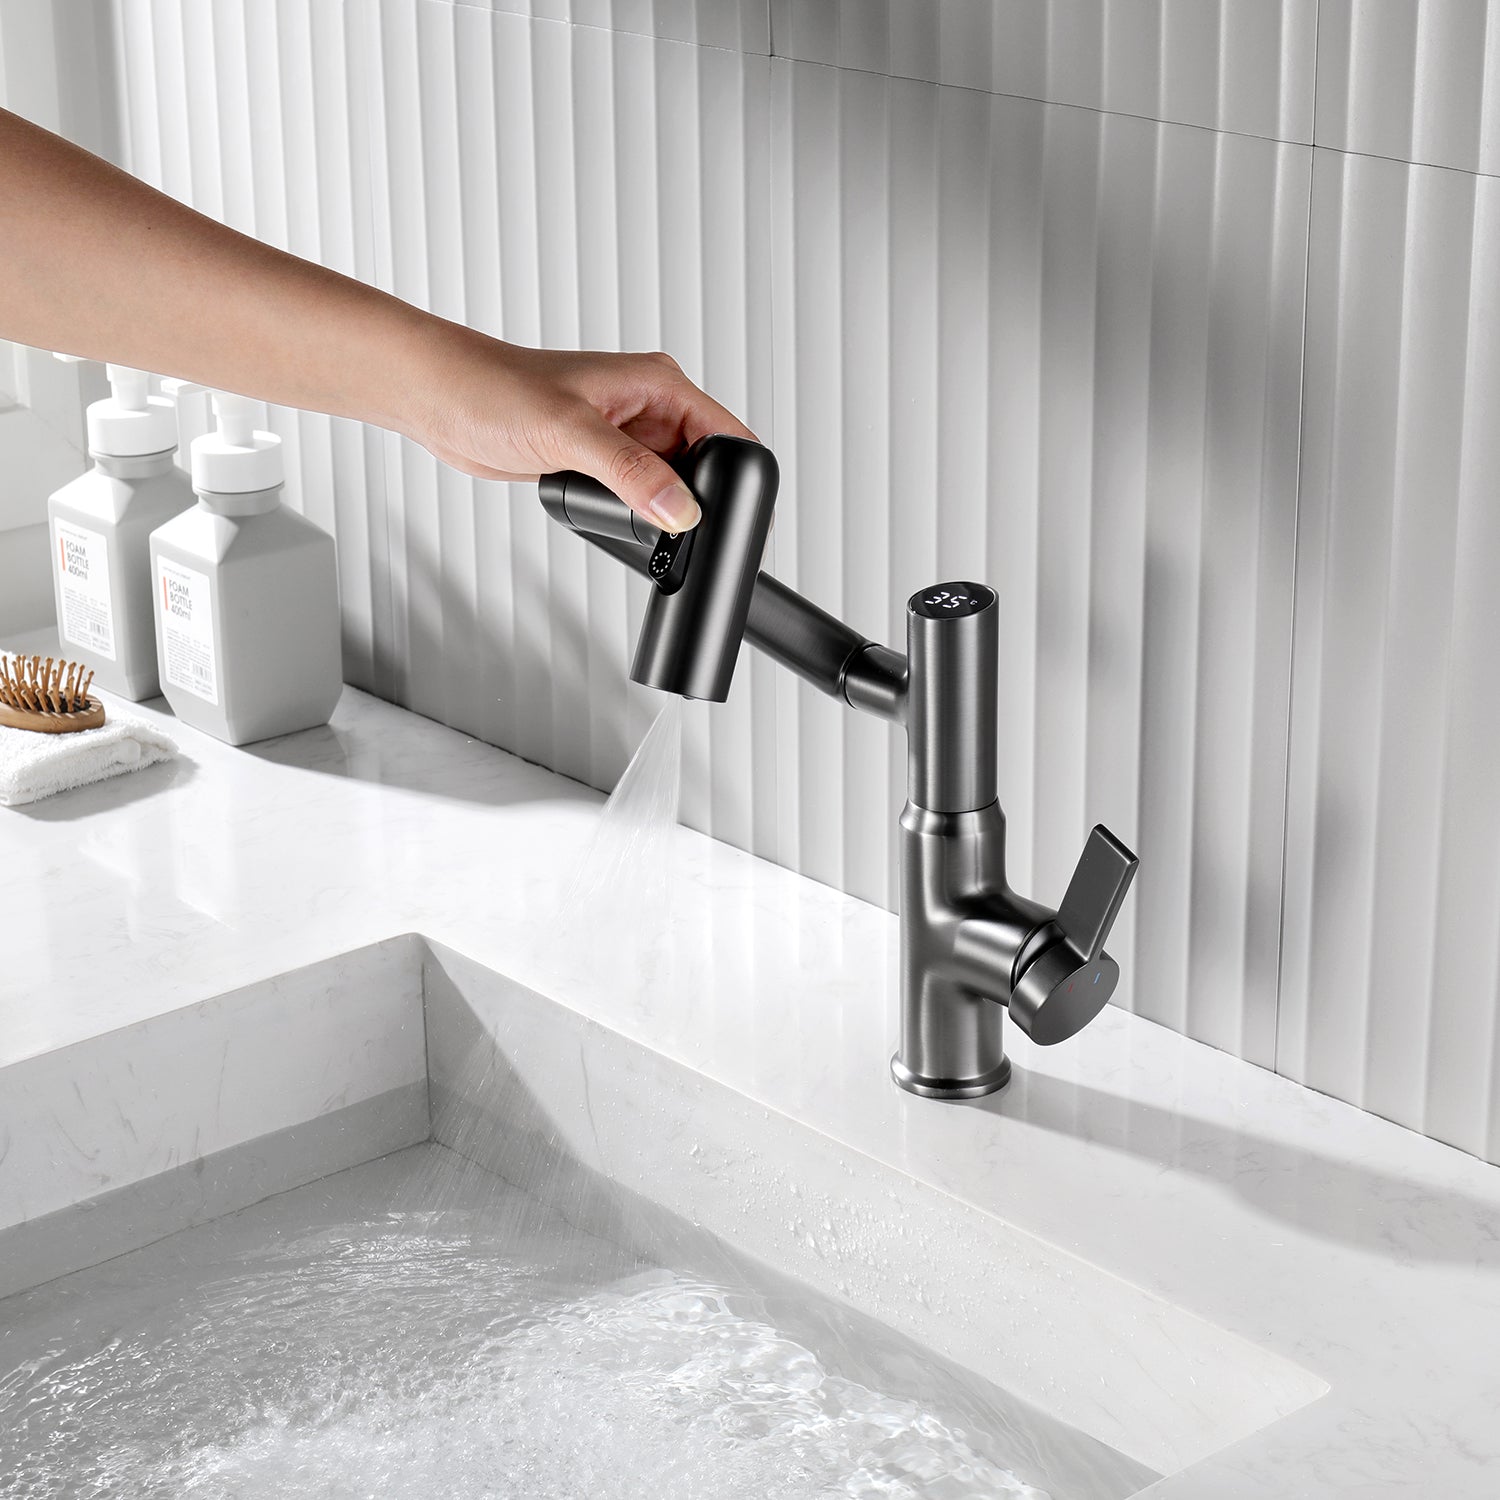 BF2204-2, Lefton Single-Hole Rotatable Faucet with Temperature Display